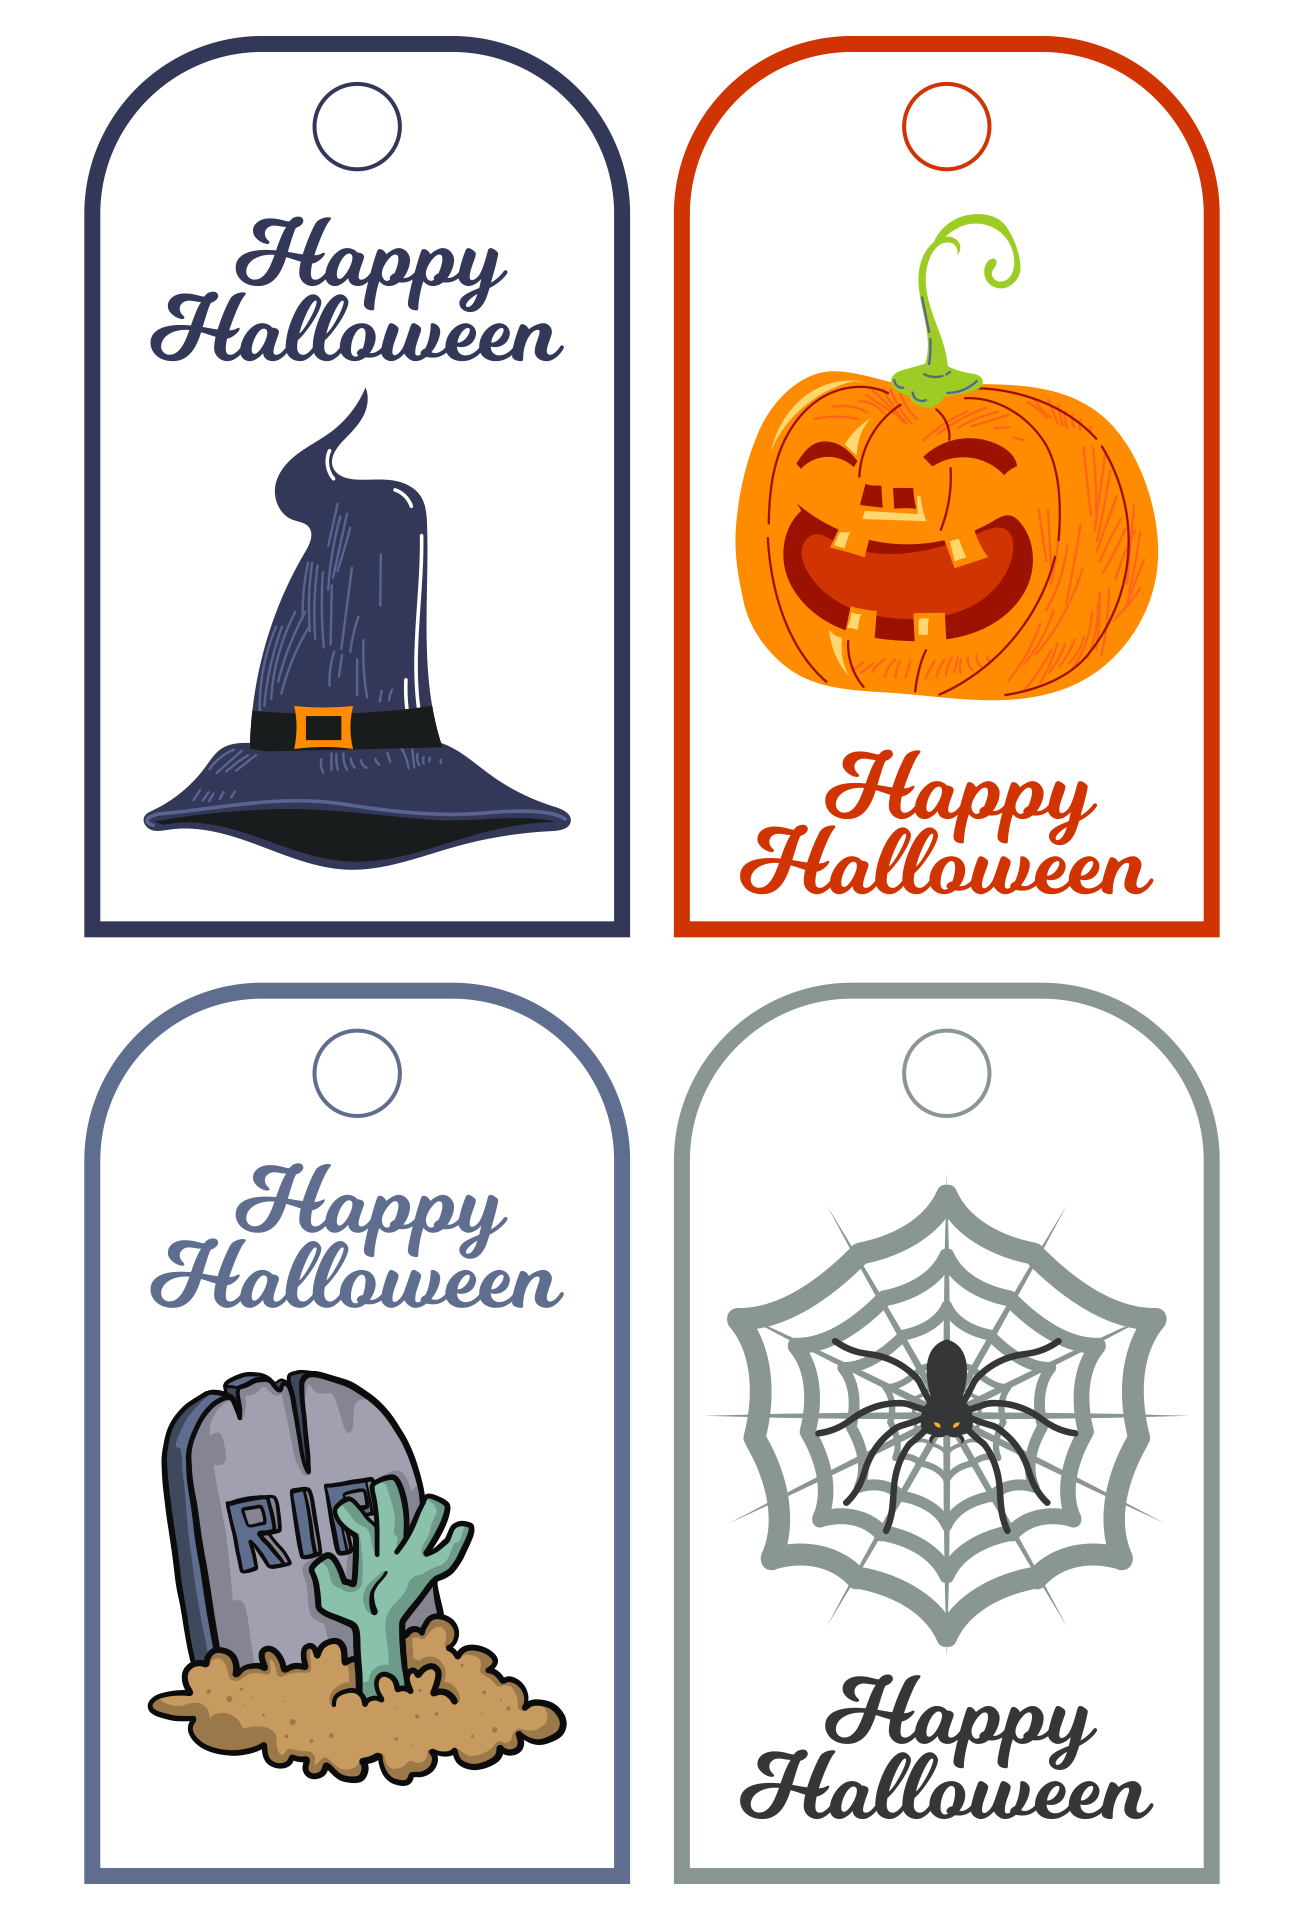 9 Best Images of Personalized Gift Free Printable Halloween Tags